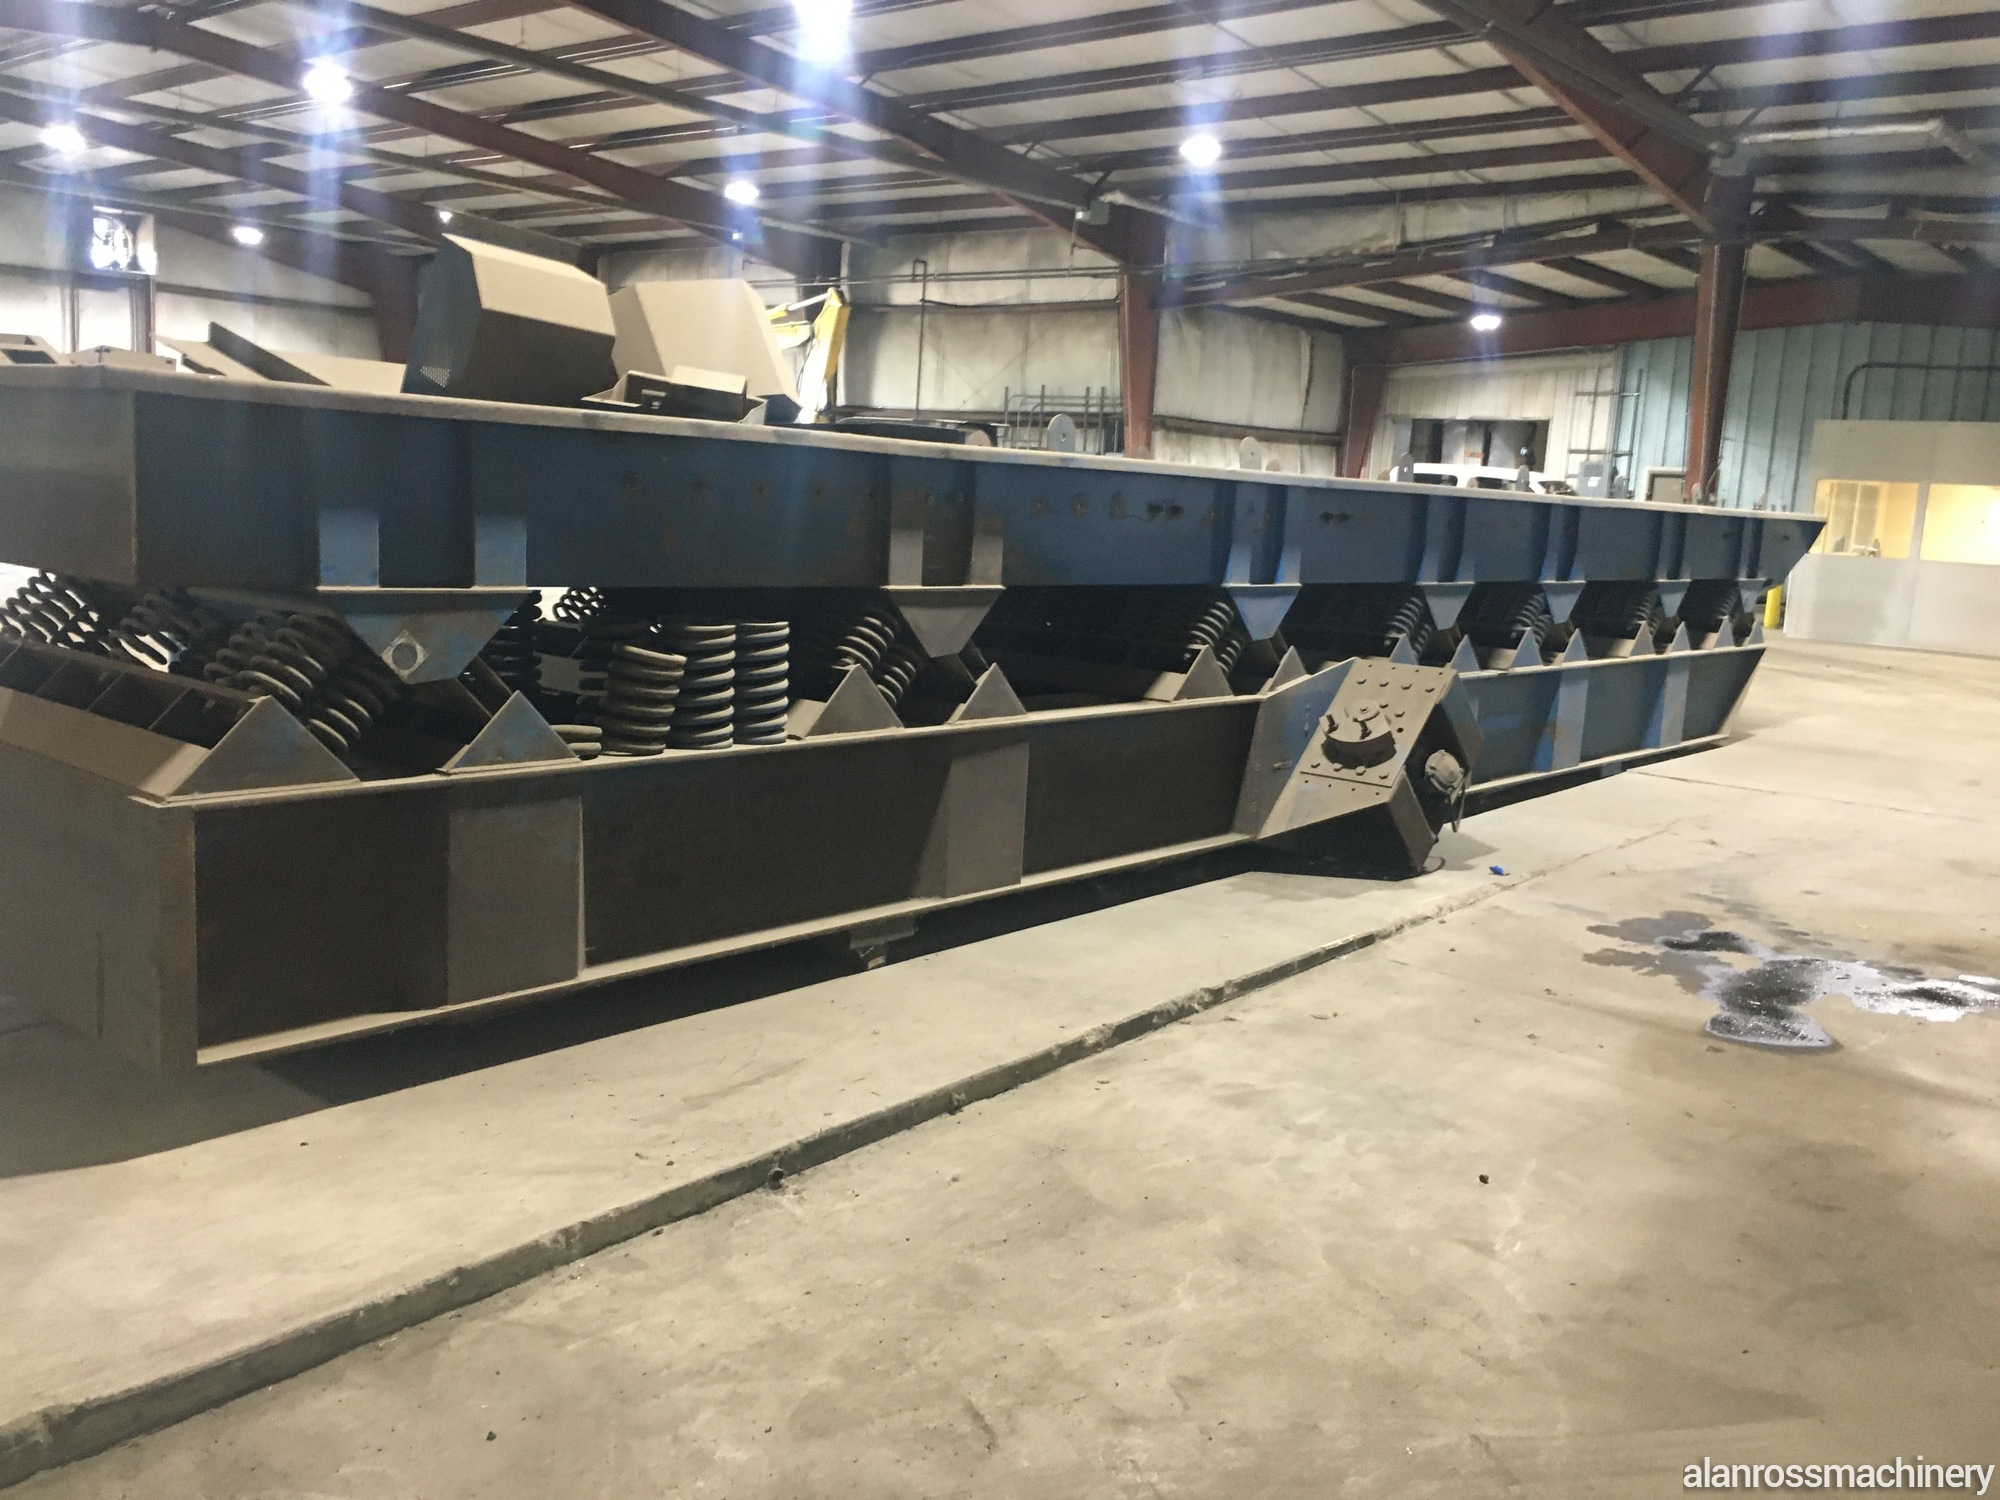 KINERGY CORPORATION UNASSIGNED Screens | Alan Ross Machinery